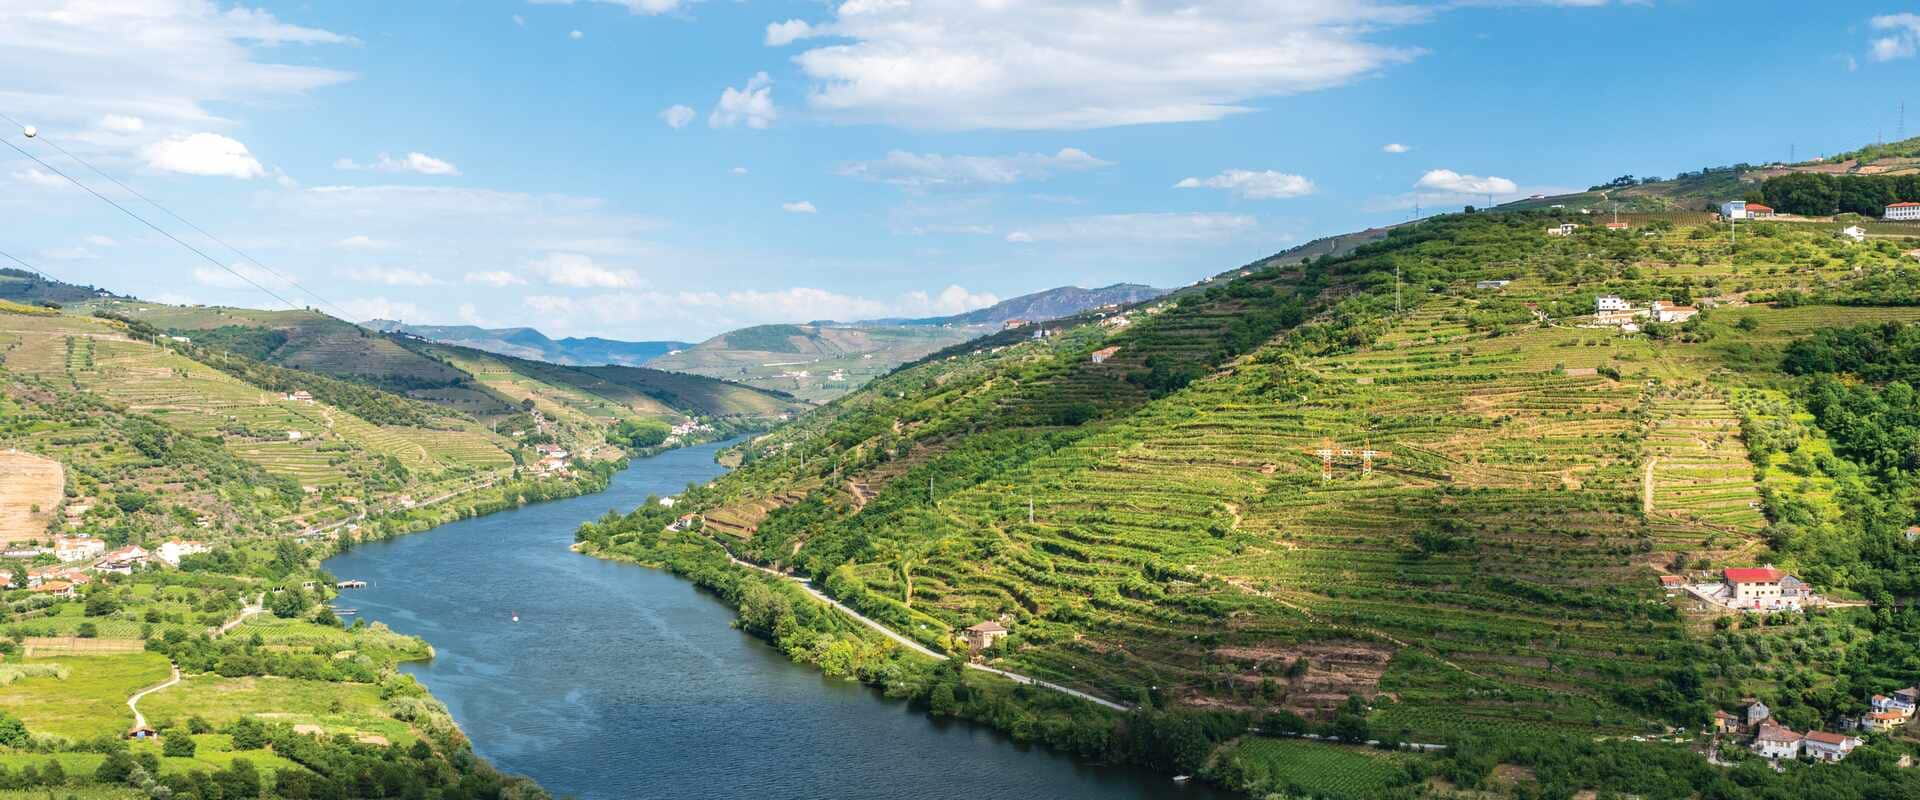 River snaking its way through the rolling hills covered in vineyards